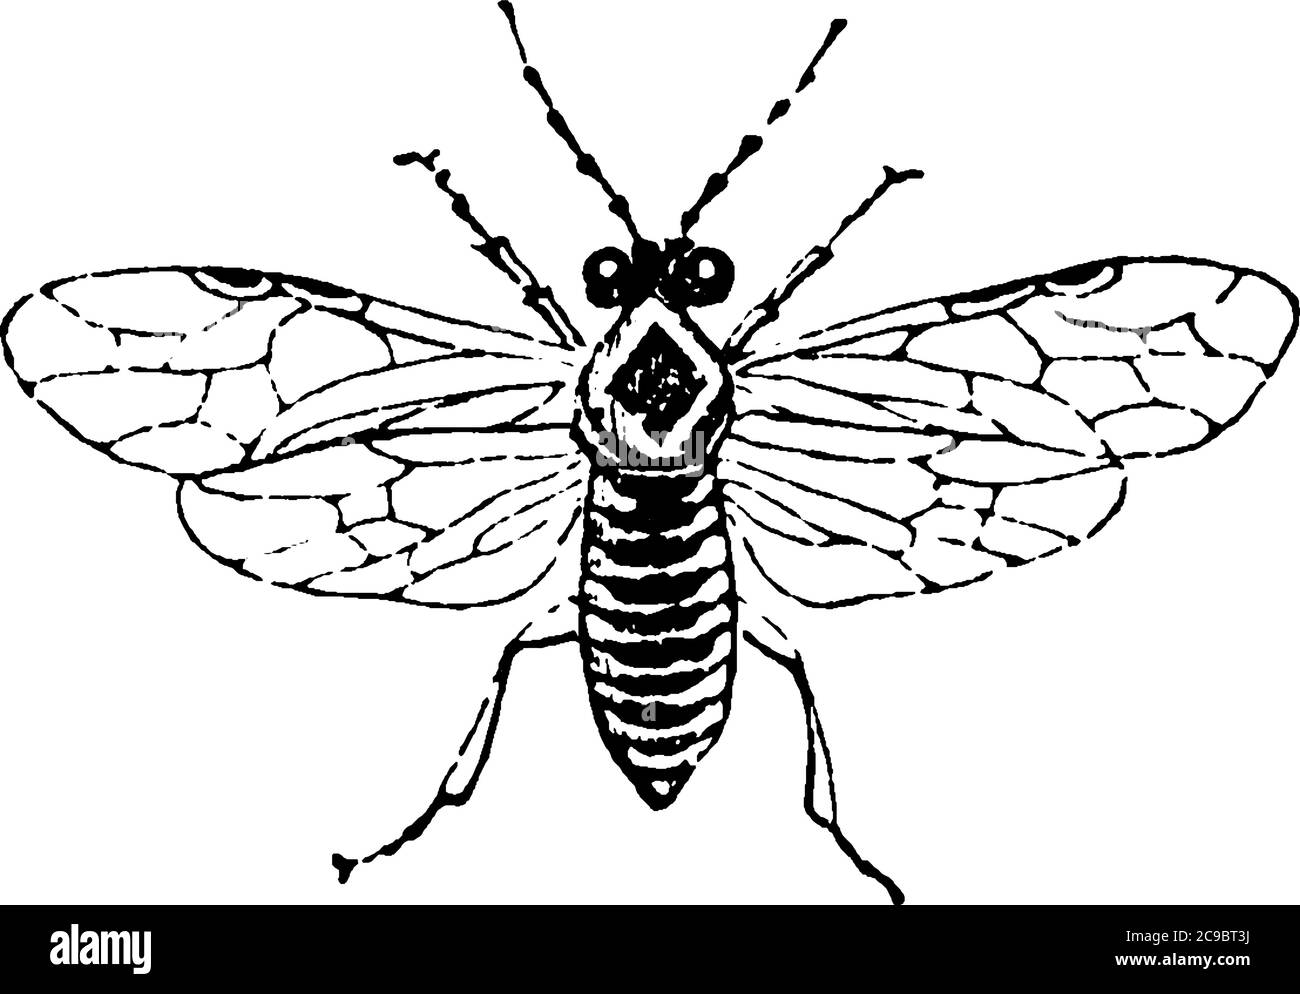 Sawflies are the insects of the suborder Symphyta within the order Hymenoptera alongside ants, bees and wasps, vintage line drawing or engraving illus Stock Vector